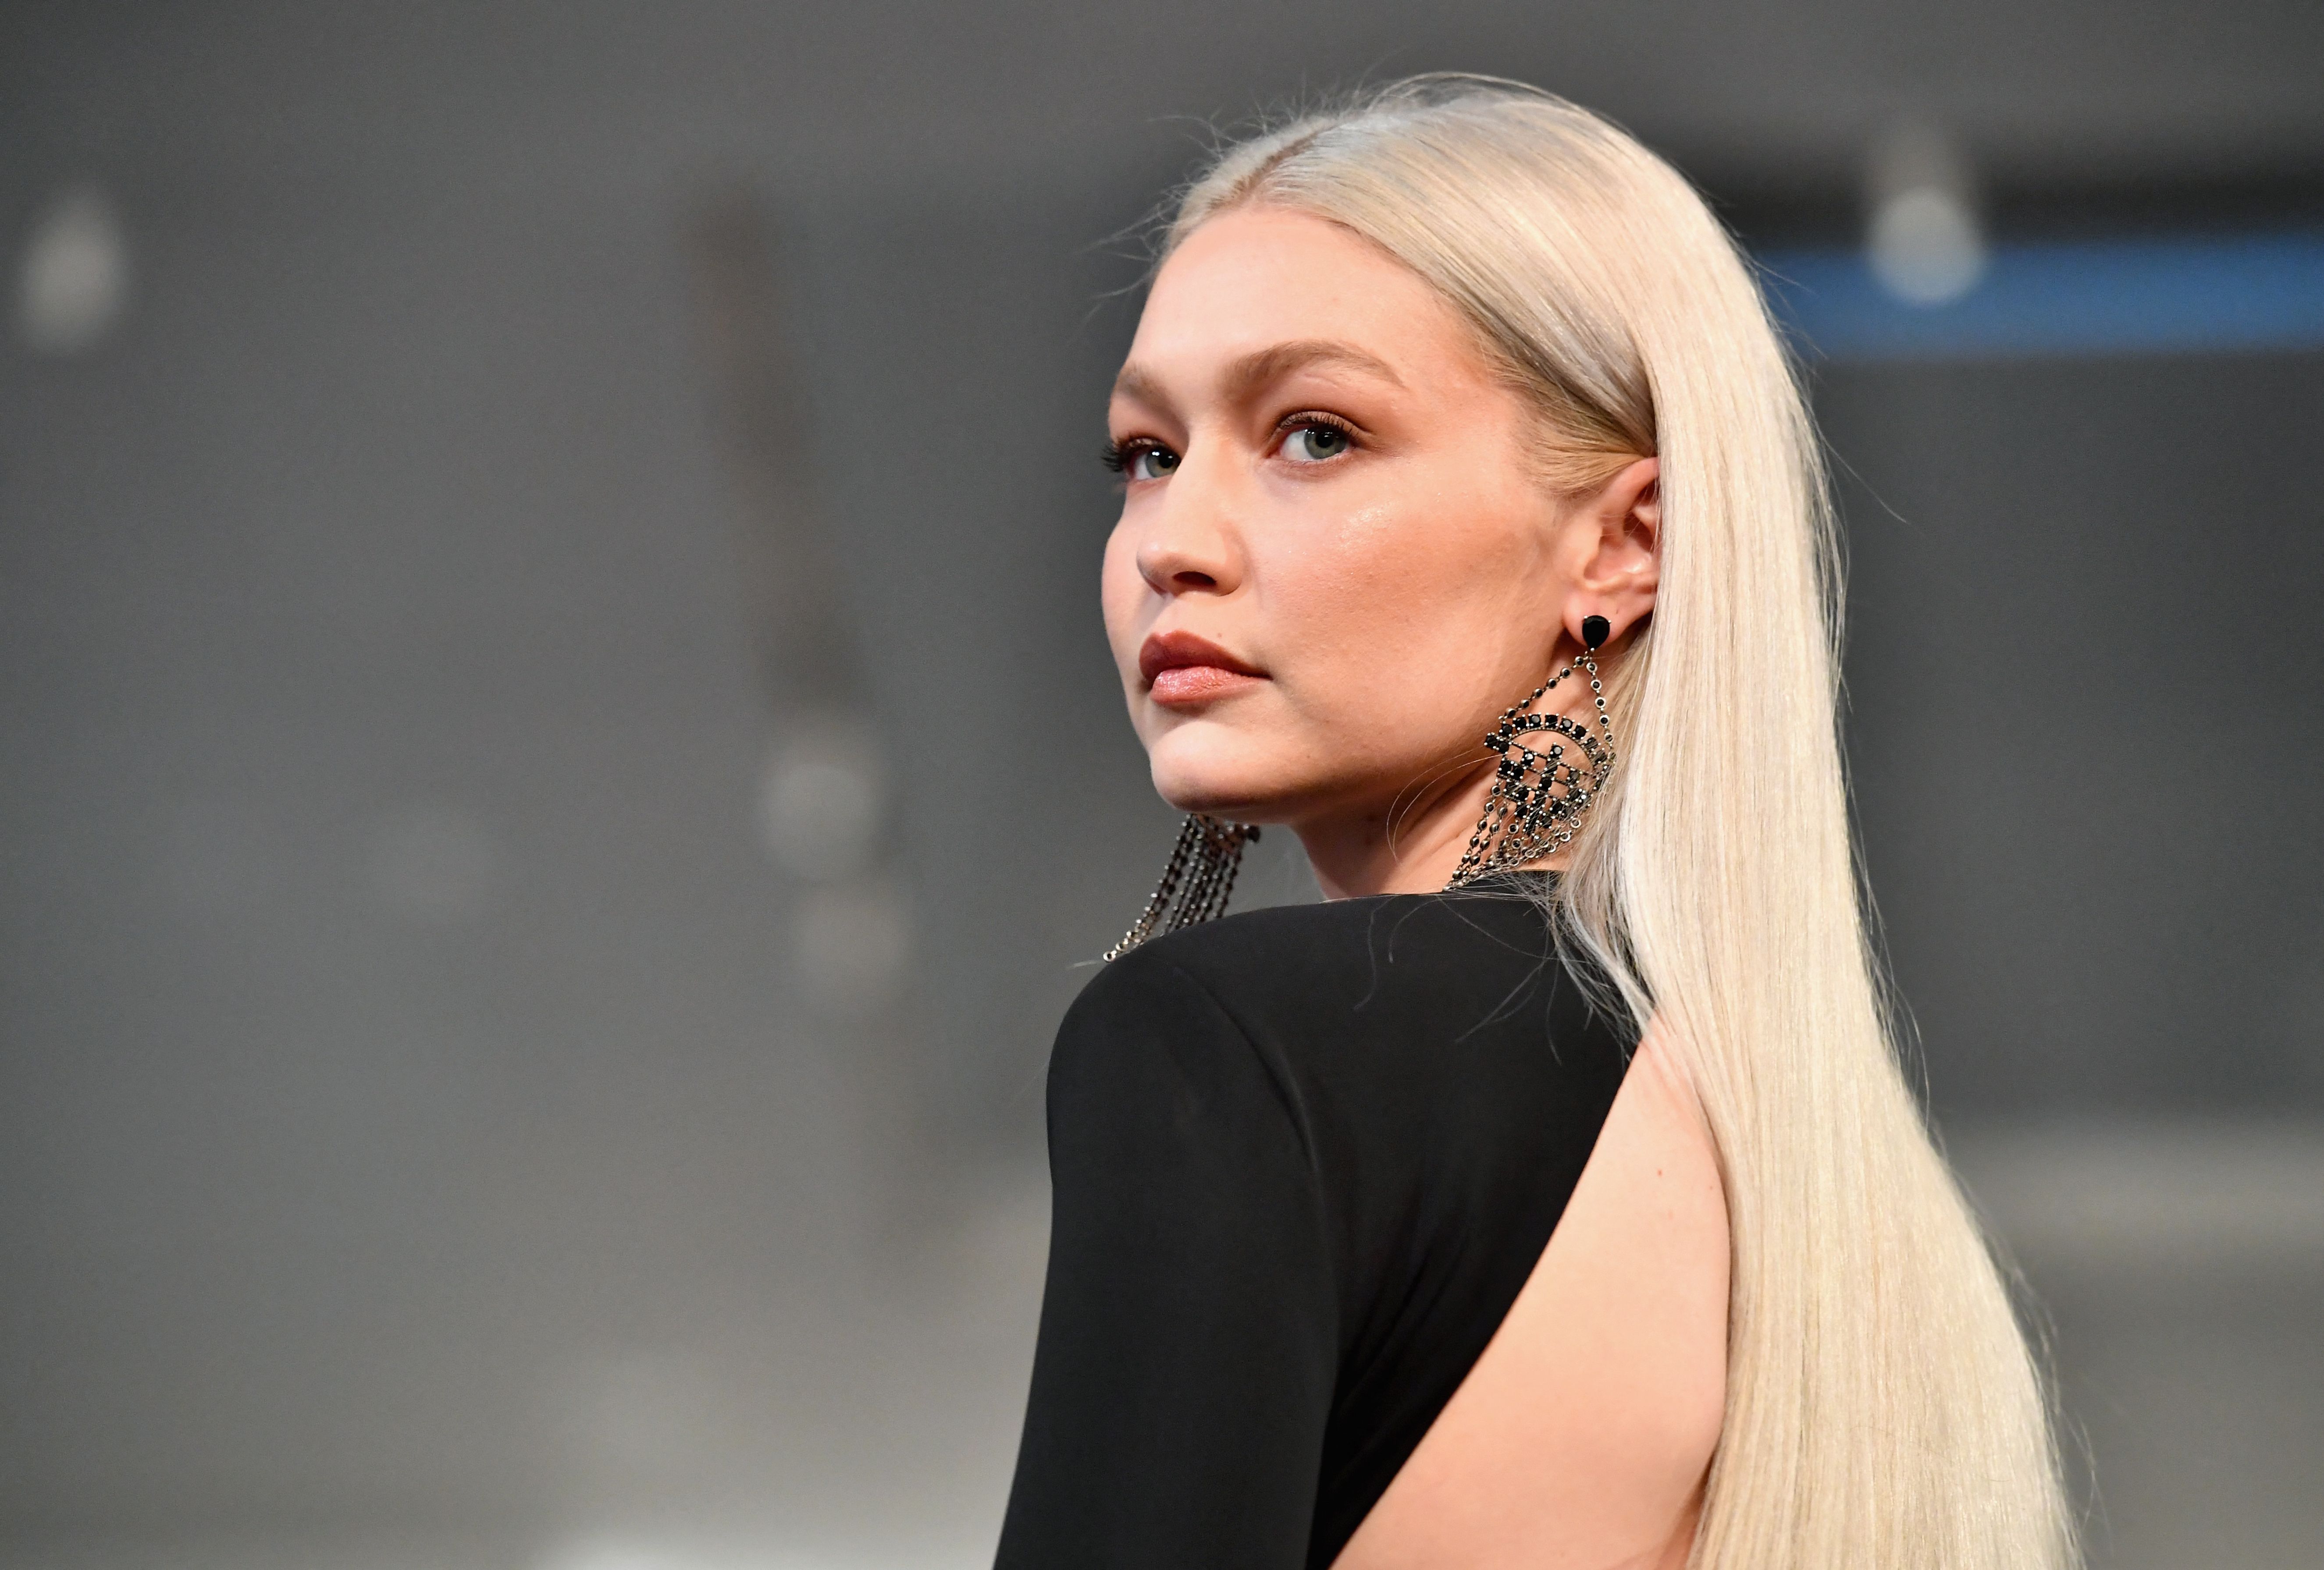 Bella Hadid, Blake Lively attend birthday party for Gigi Hadid's daughter  Khai